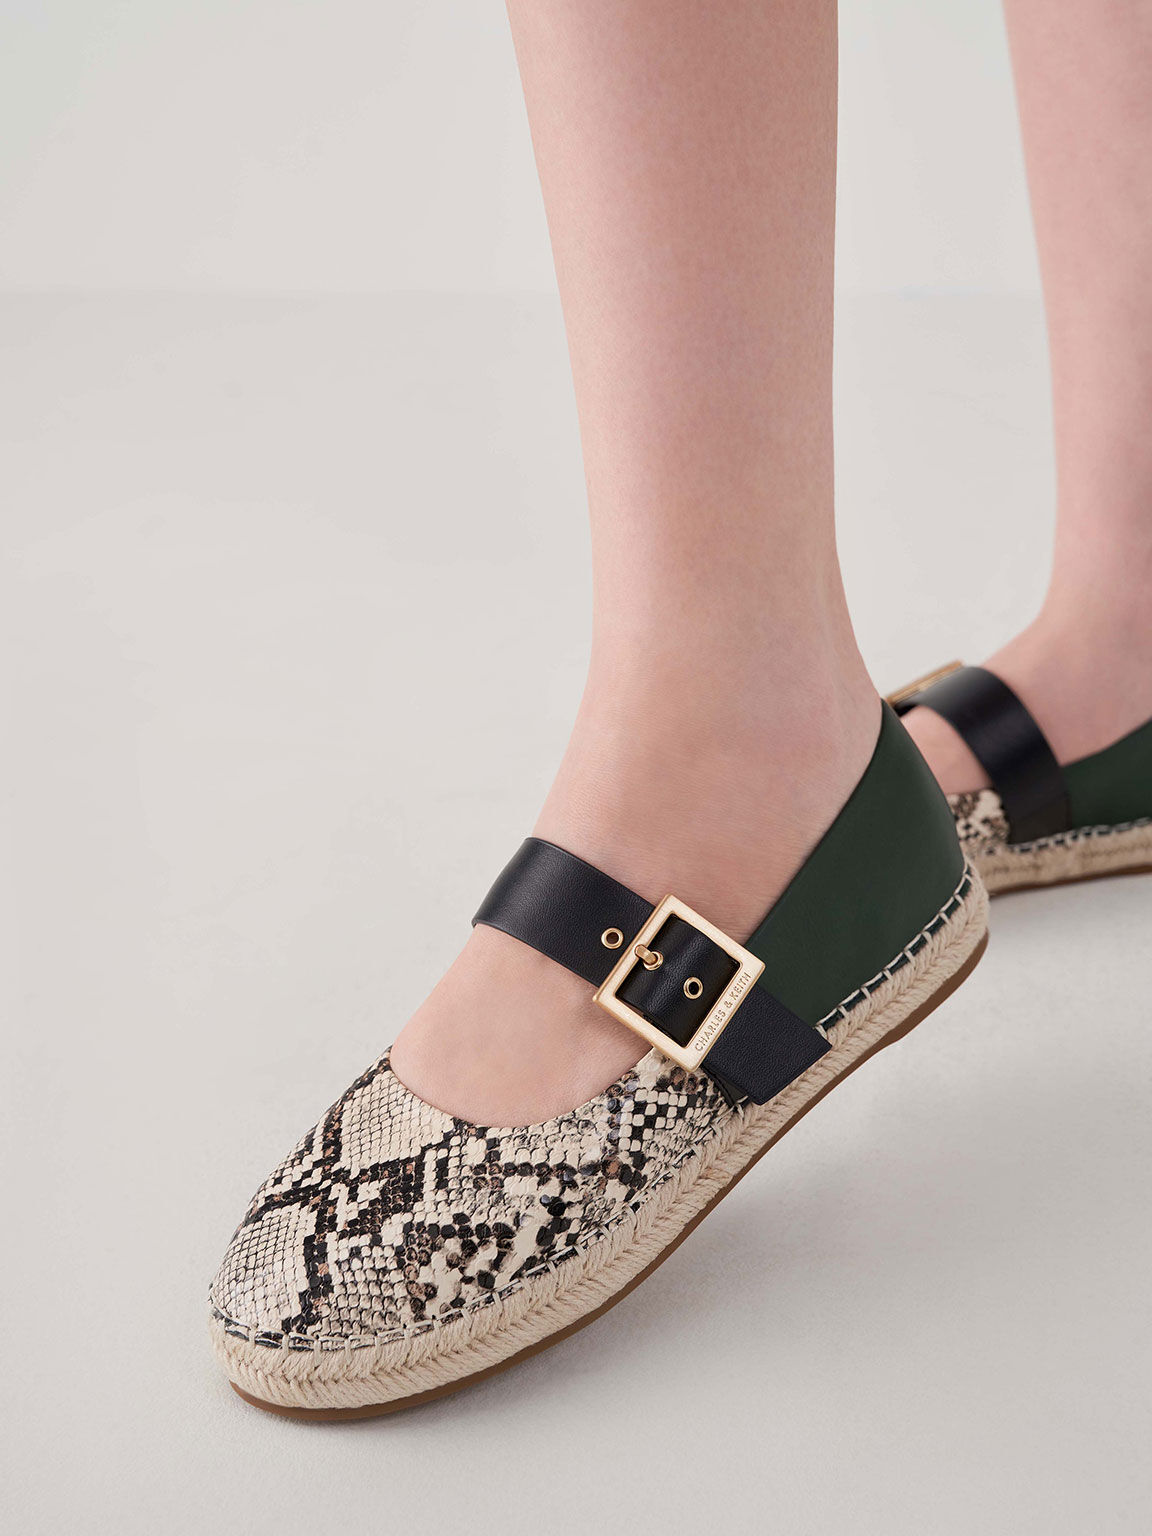 Snake-Print Buckled Espadrille Flats - CHARLES & KEITH VN